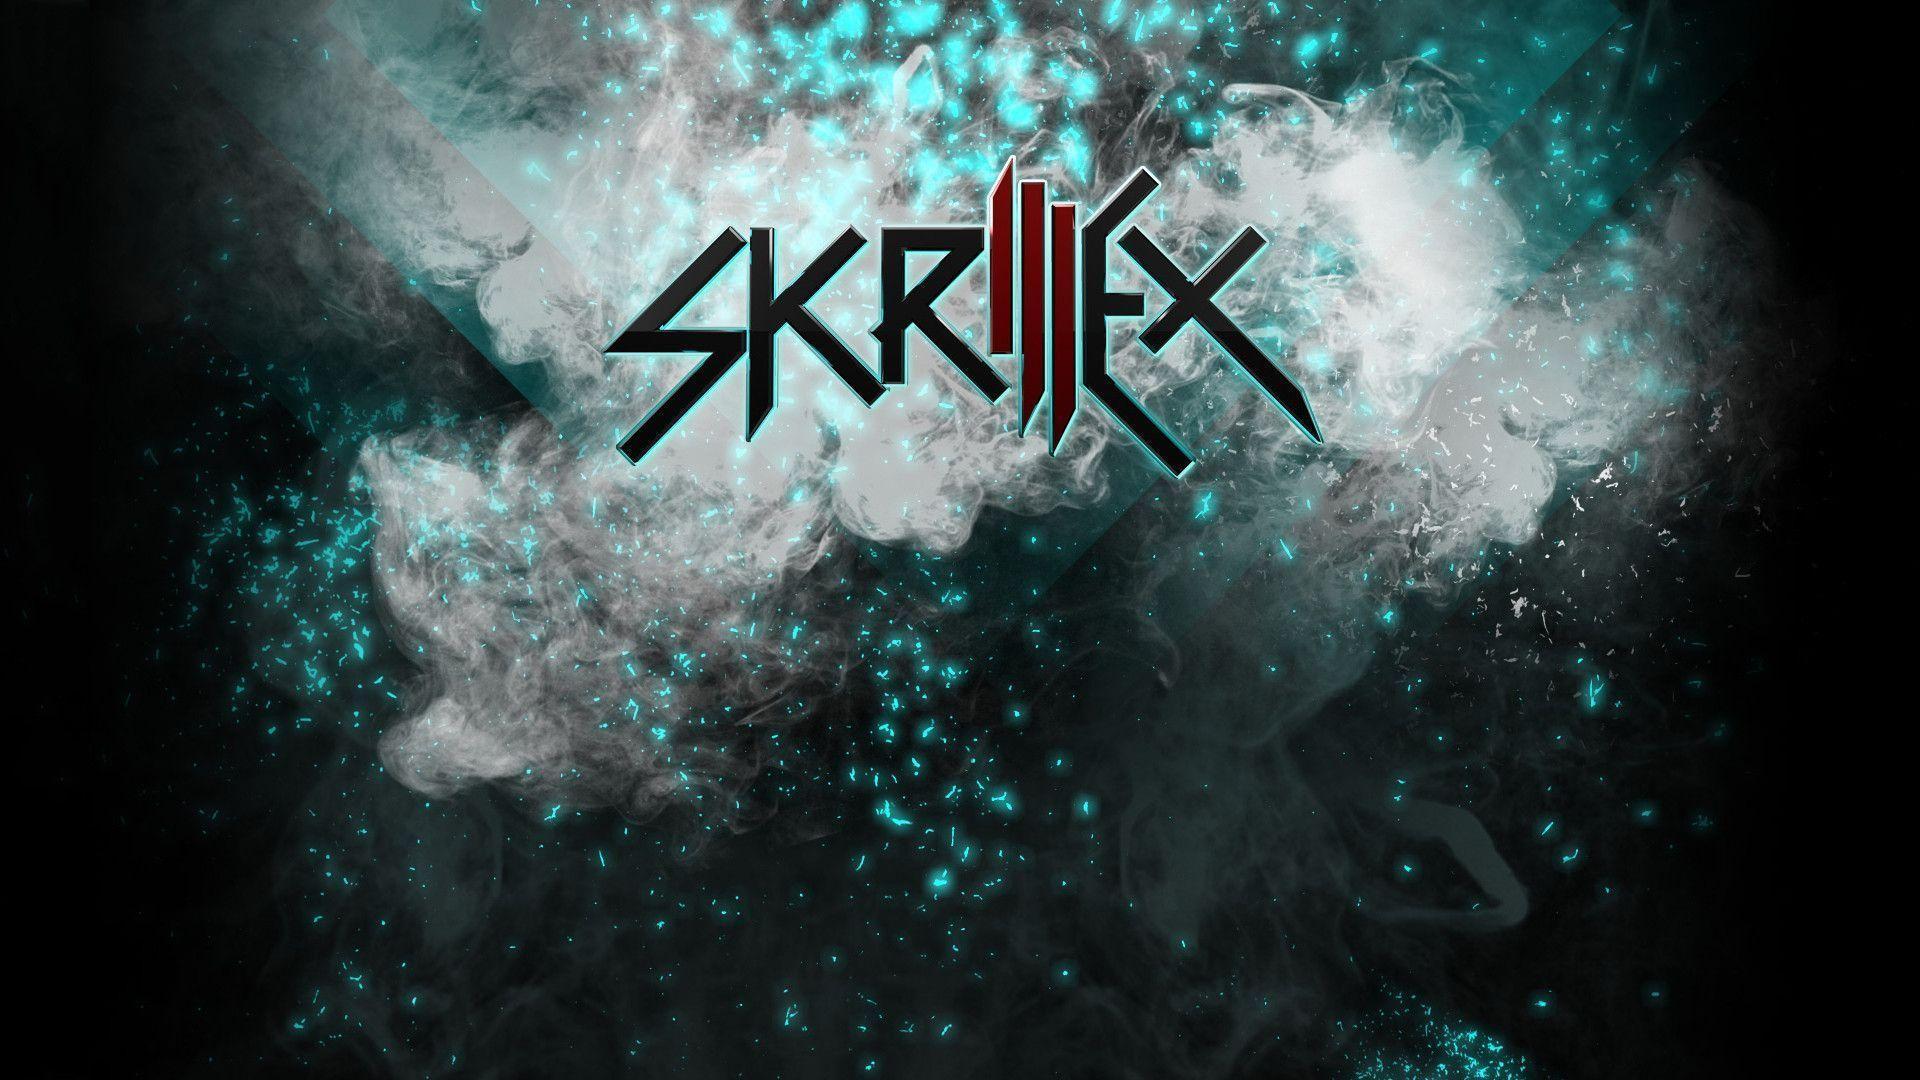 Wallpapers For > Skrillex Wallpapers Hd For Iphone